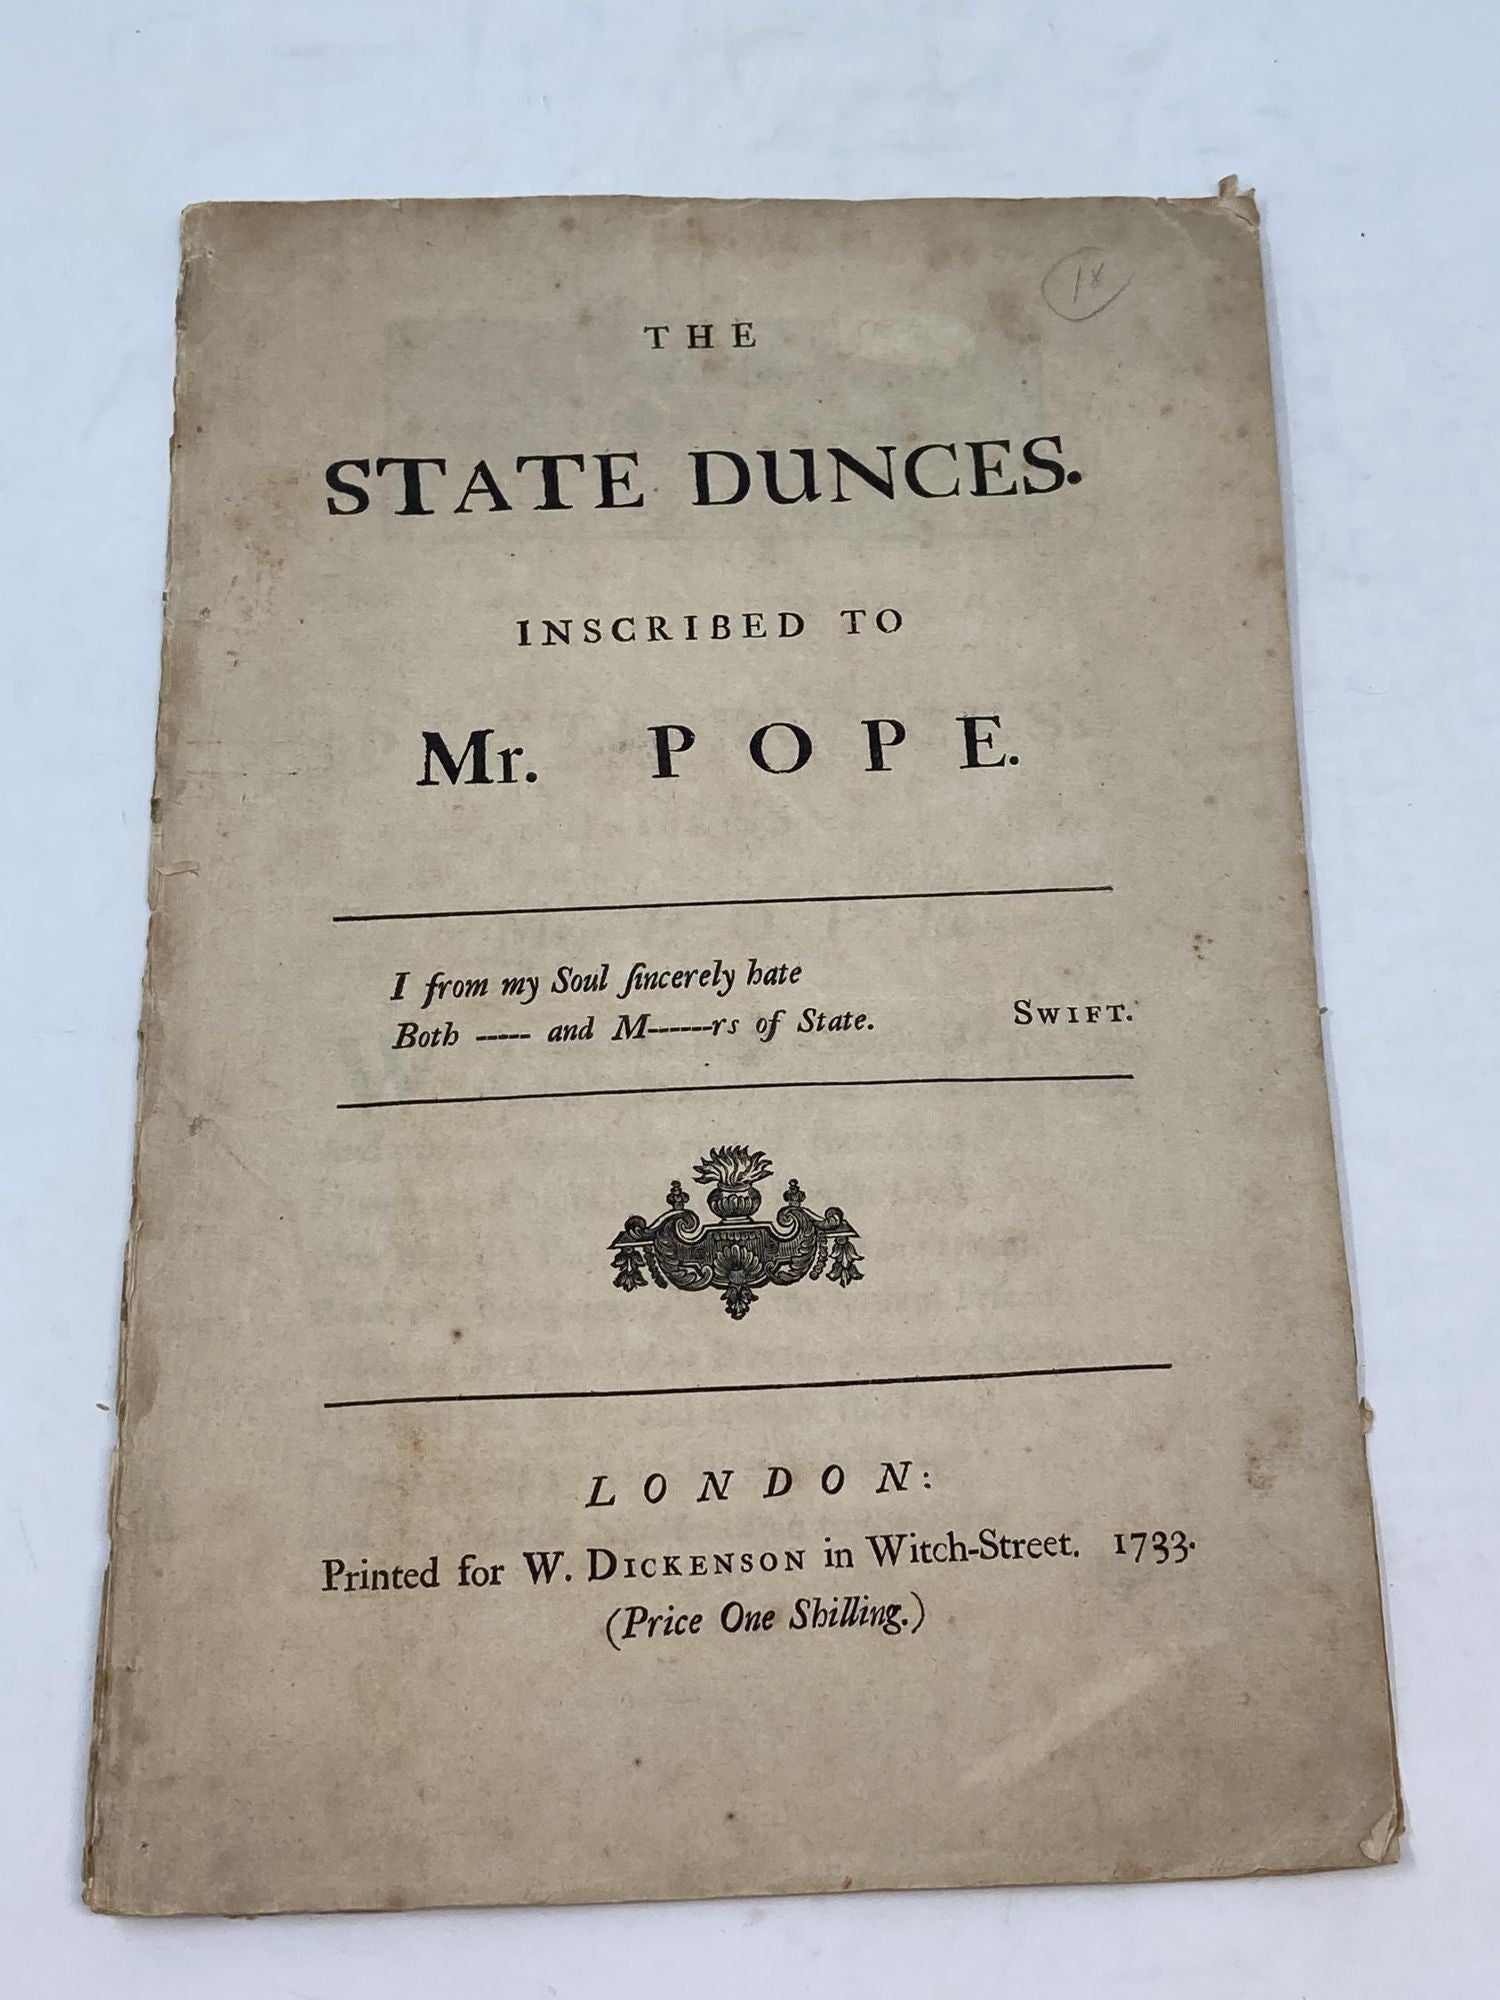 Whitehead, Paul - The State Dunces Inscribed to Mr. Pope